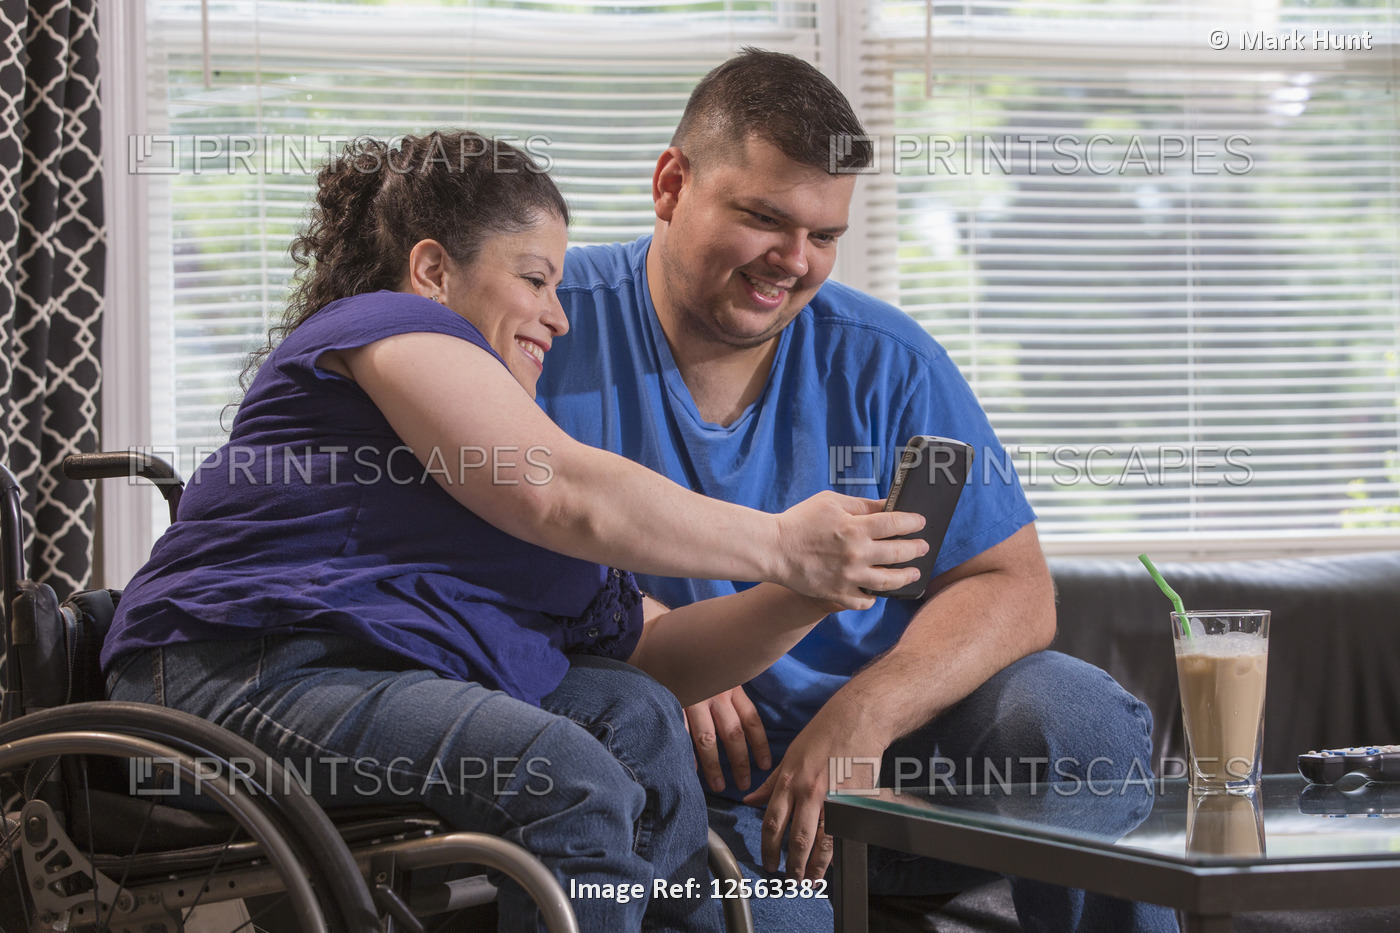 Woman with Spina Bifida and her husband looking at a text message at home